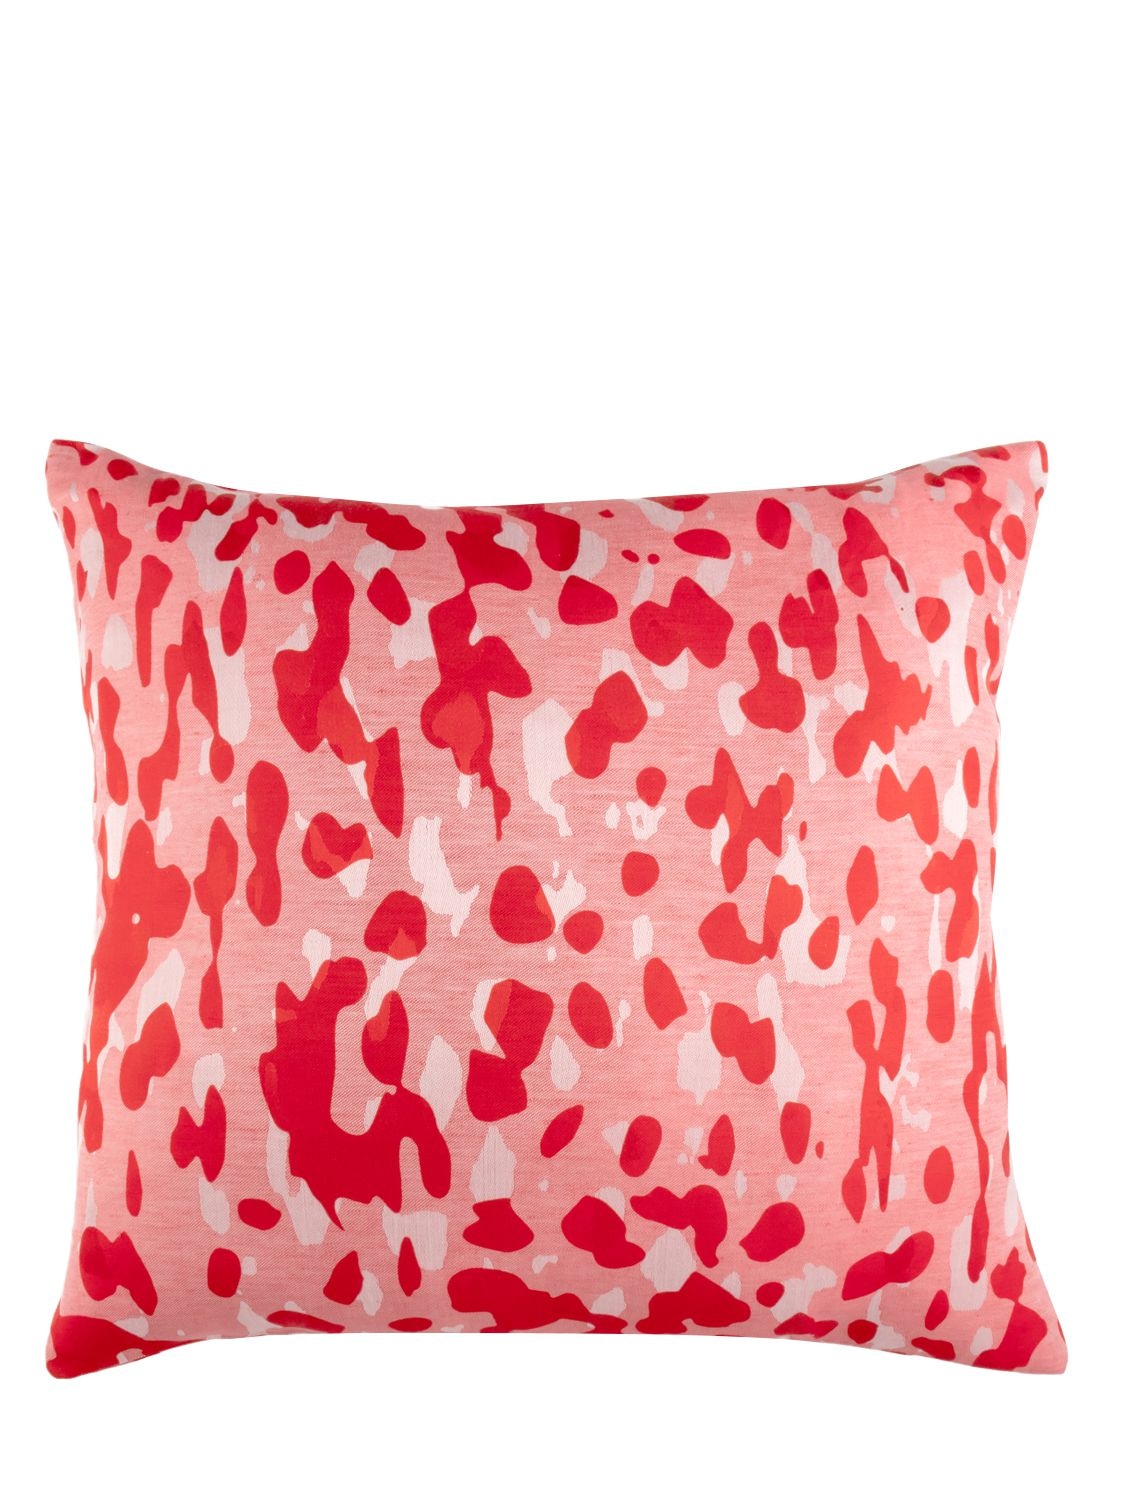 Stories Of Italy Watermelon Cushion In Red